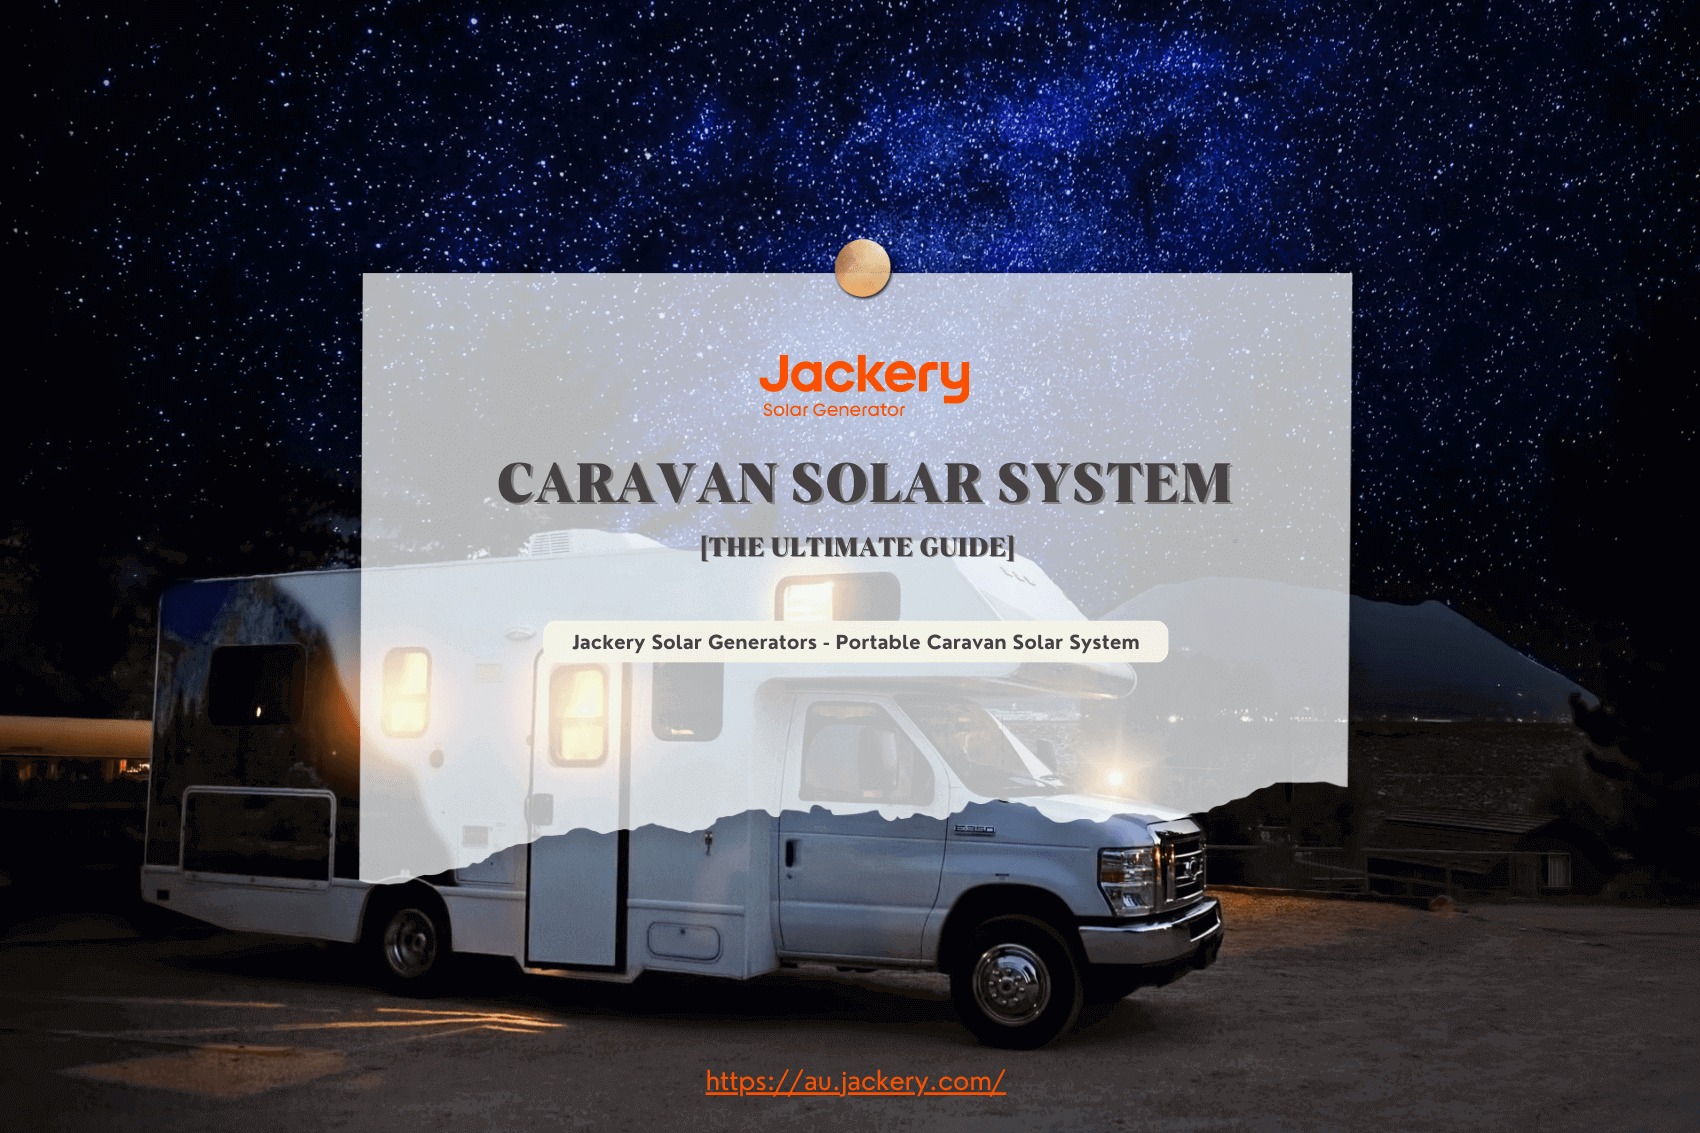 The Ultimate Guide to Caravan Solar System